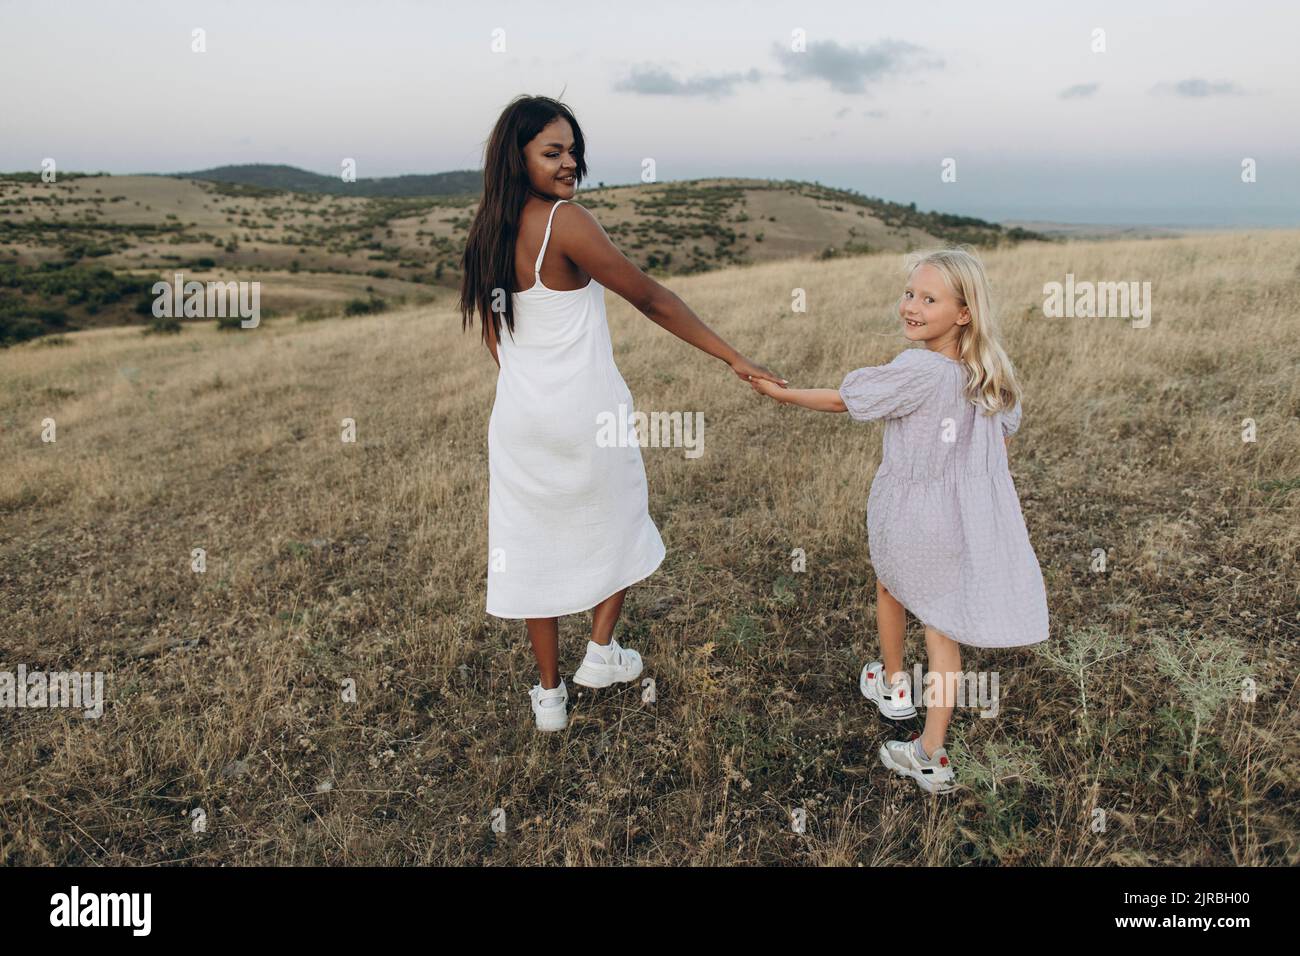 Smiling woman and girl holding hands walking in meadow Stock Photo